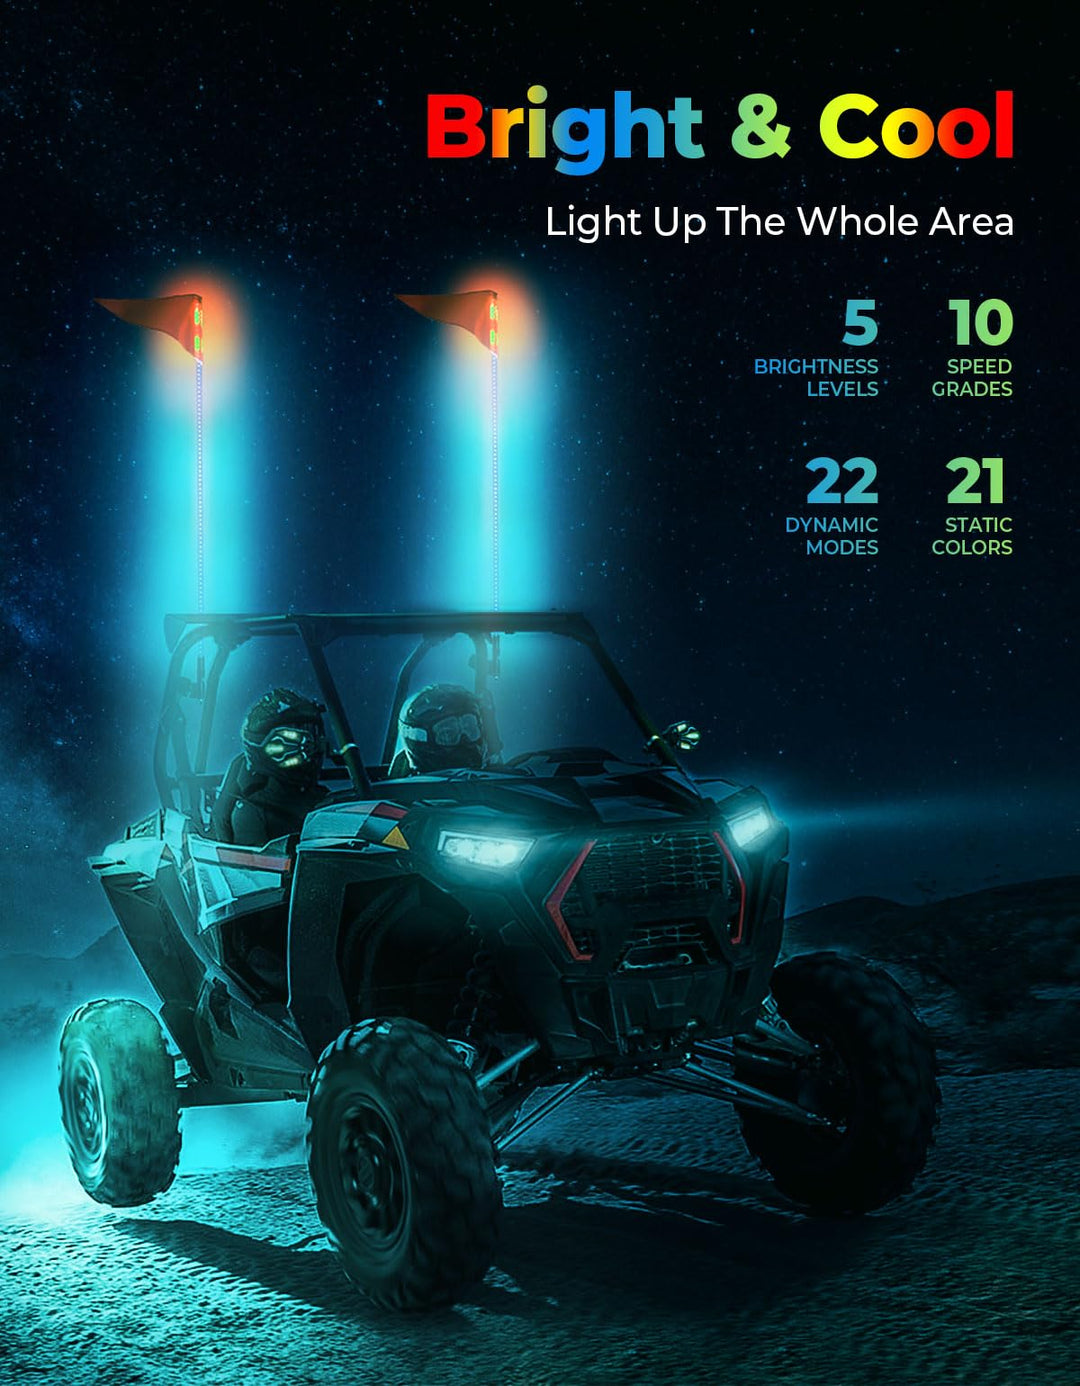 Bluetooth 5ft UTV ATV Spiral LED Whip Lights with Quick-Release Mounting Base| Kemimoto